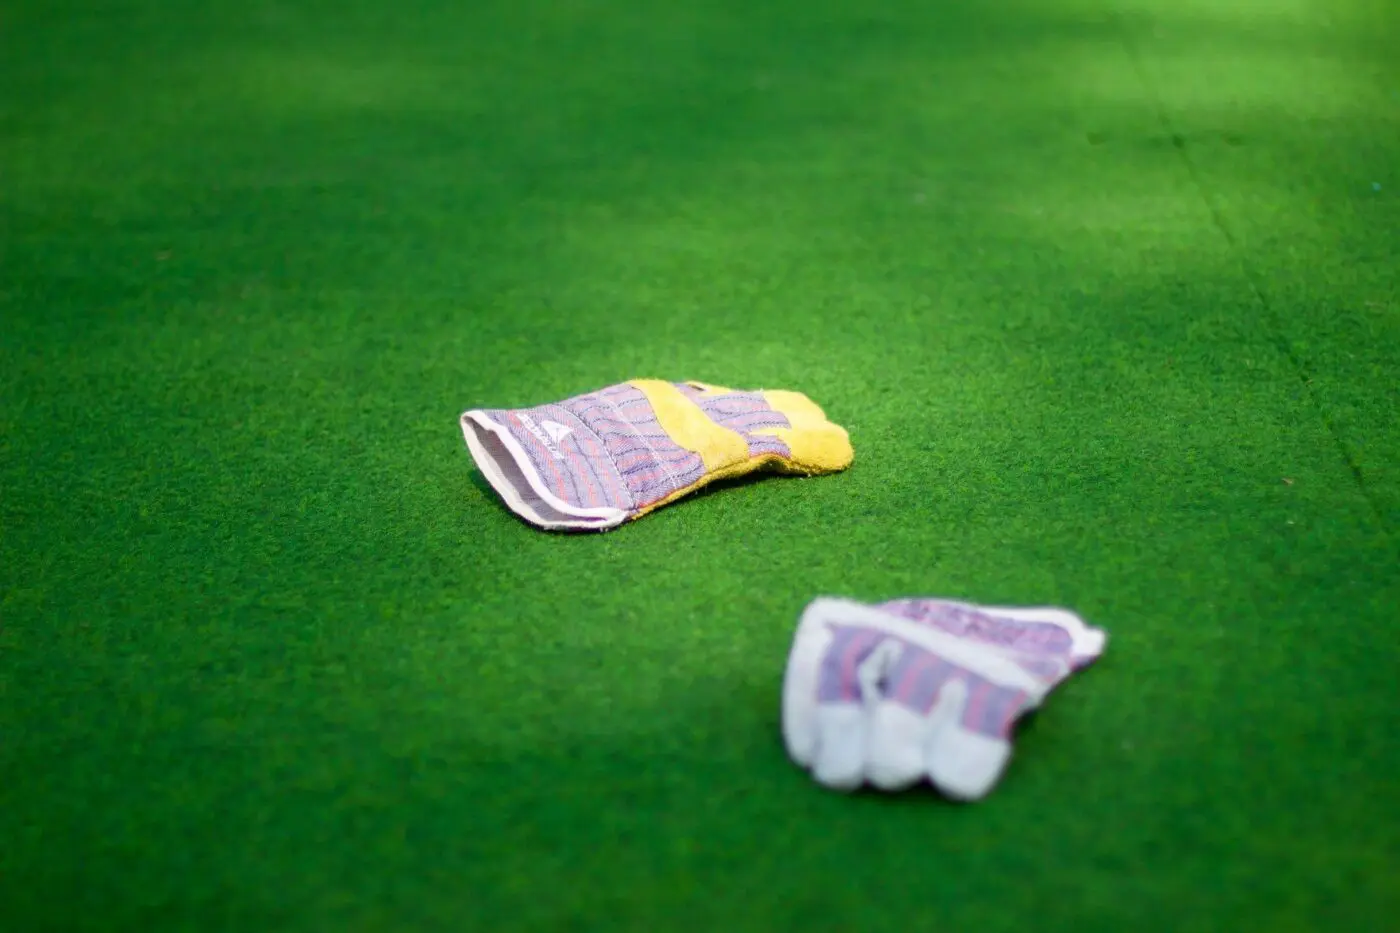 A pair of colorful work gloves lies on a well-manicured Artificial Turf lawn. The gloves are slightly separated from each other, with one positioned closer to the foreground and the other further back. Bright sunlight casts shadows on the grass, perfect for playing fields or residential areas.